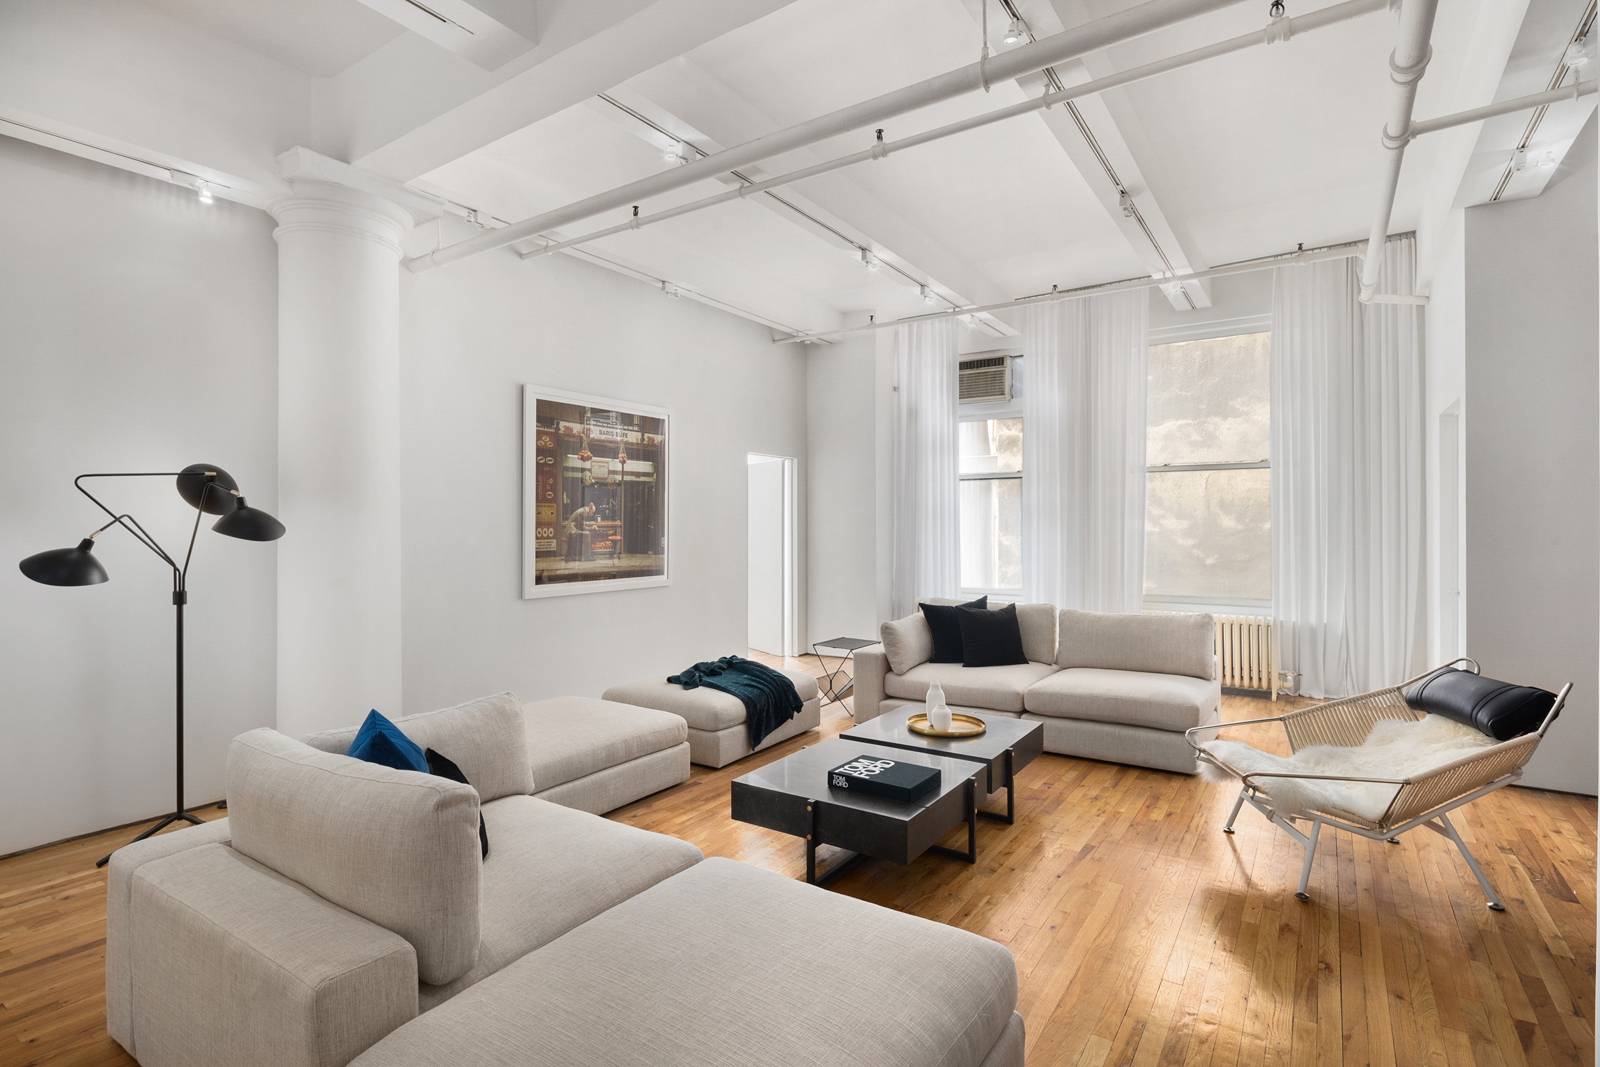 Grandly proportioned, with a sense of scale rarely found on the Gold Coast of Fifth Avenue, this loft harkens back to the very essence of what made Greenwich Village the ...